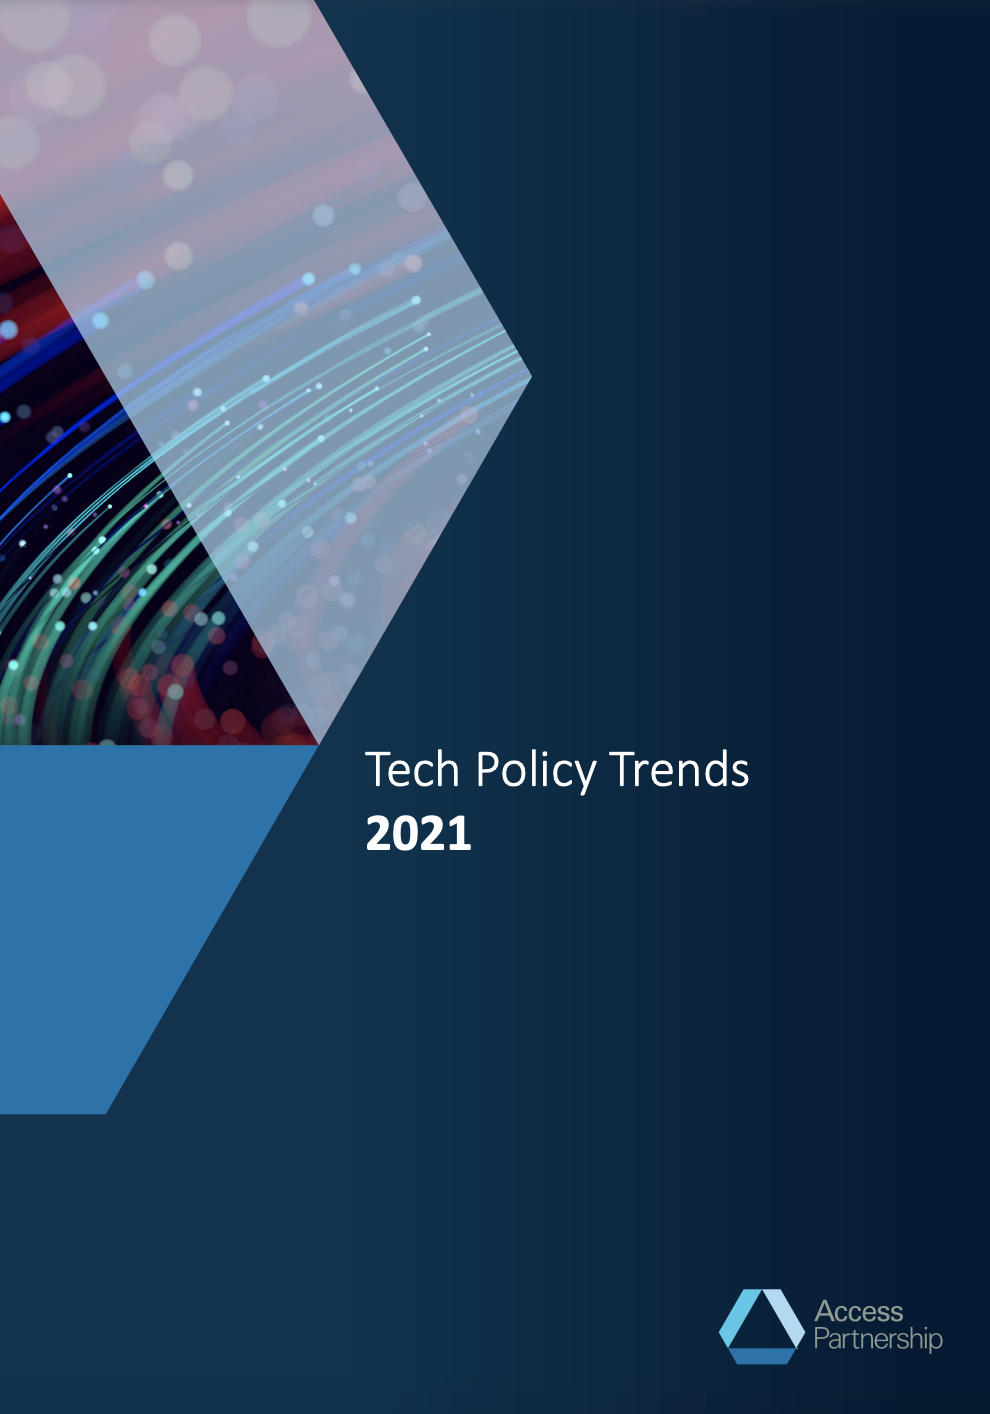 Technology Companies Poised to be on the Offensive in 2021 As Regulatory Heat Increases and Accountability is Tested